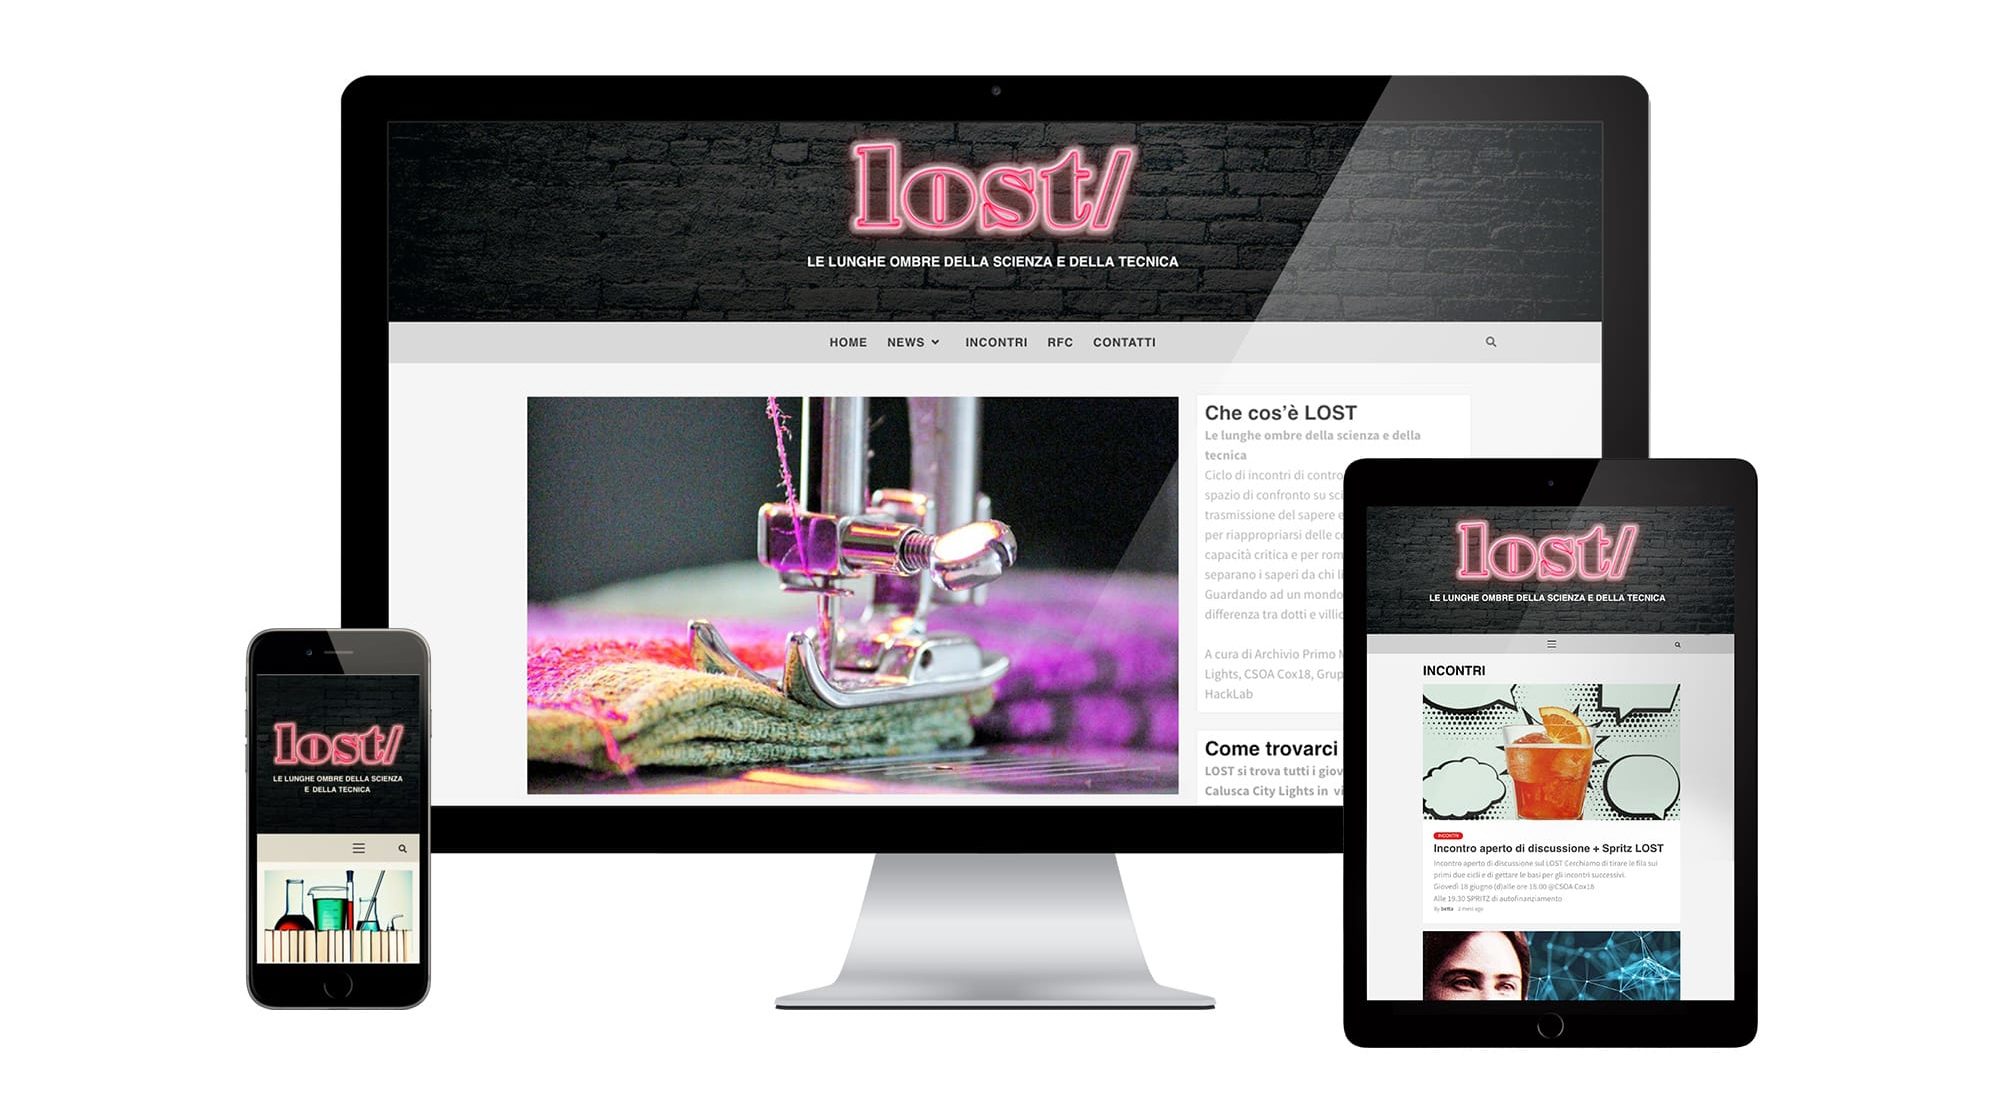 LOST website shown on desktop and mobile devices